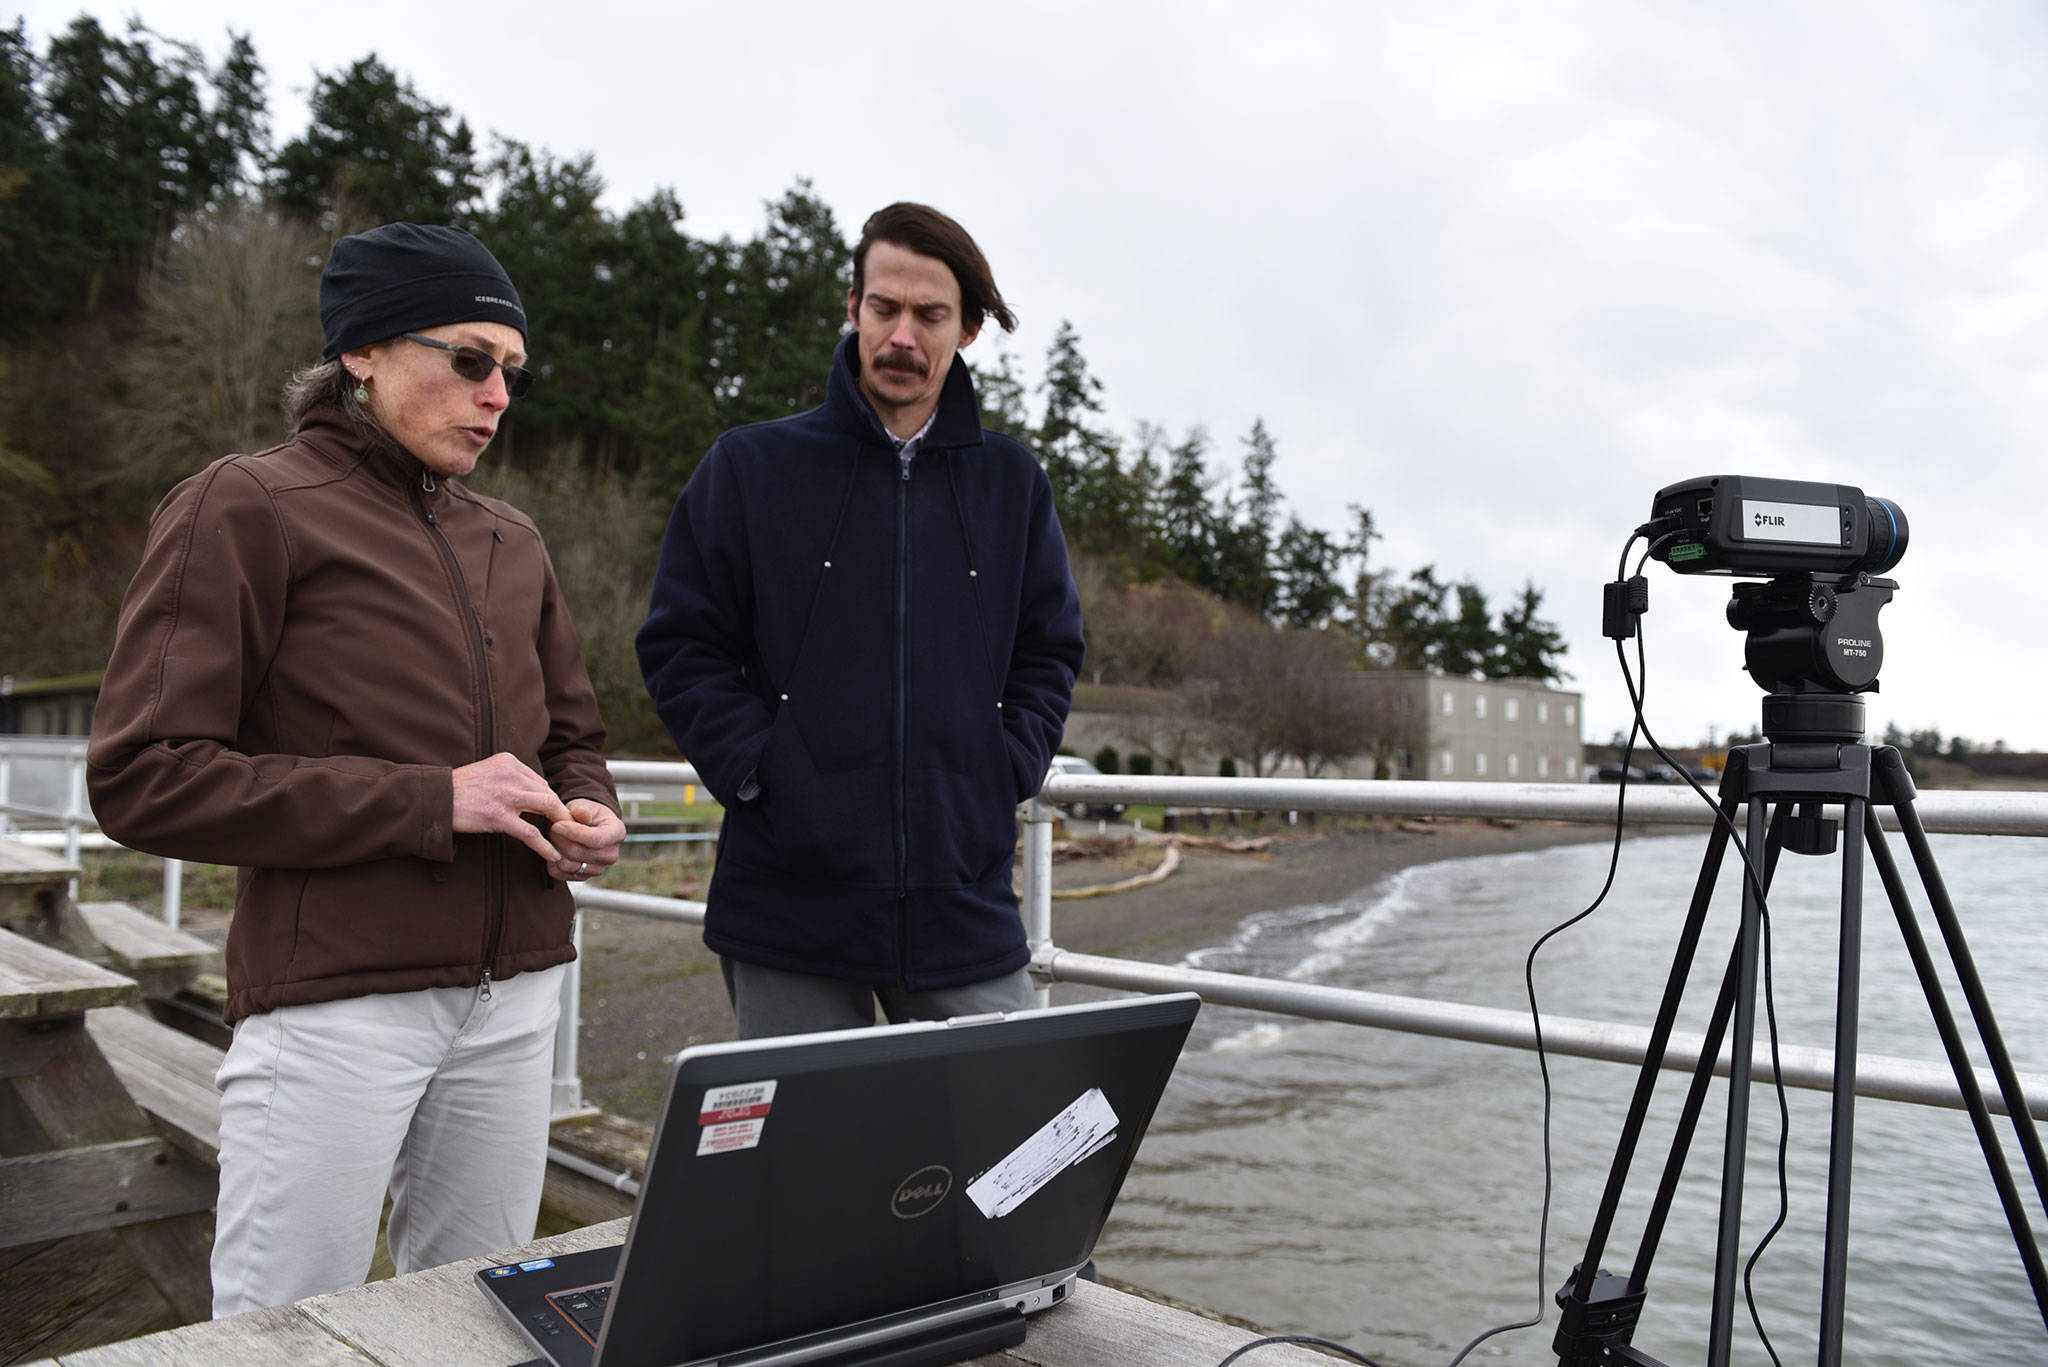 Engineers Shari Matzner and Garrett Staines with Pacific Northwest National Laboratory’s Marine Sciences Laboratory discuss their development of software that will analyze thermal video to help birds and bats co-exist with offshore wind farms. Photo by Eric Francavilla/Pacific Northwest National Laboratory